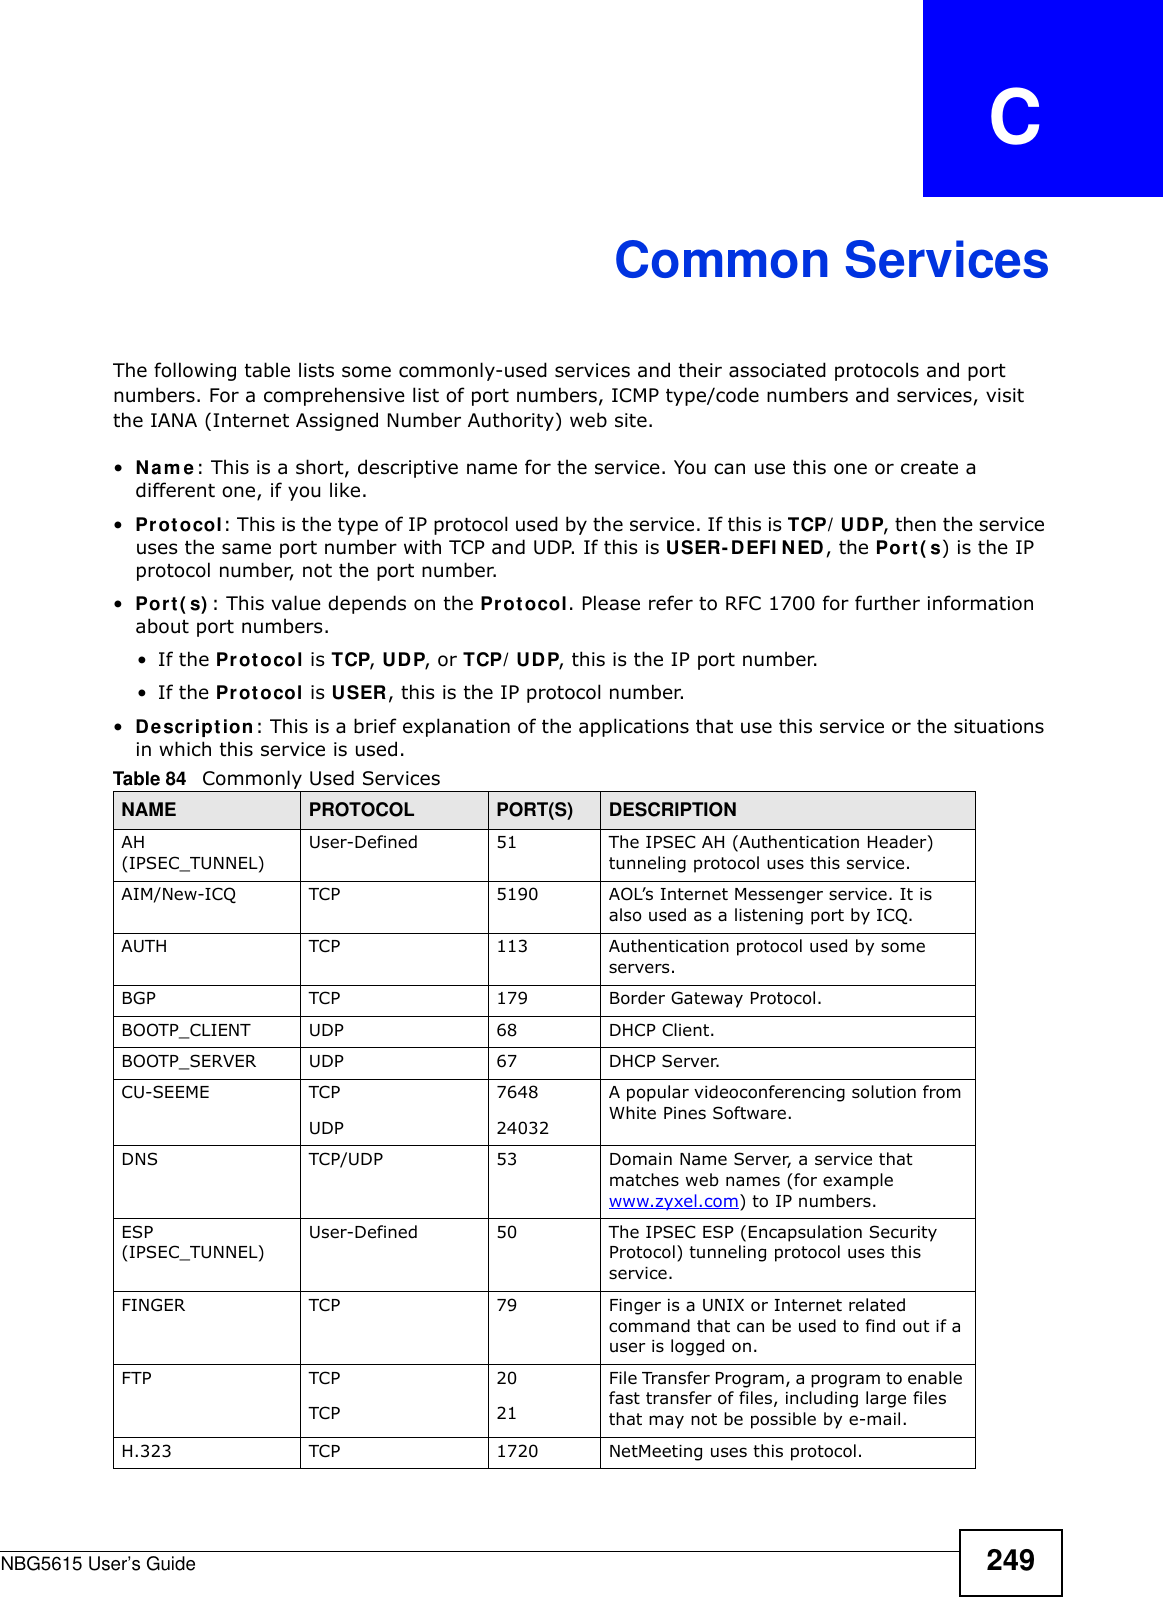 NBG5615 User’s Guide 249APPENDIX   CCommon ServicesThe following table lists some commonly-used services and their associated protocols and port numbers. For a comprehensive list of port numbers, ICMP type/code numbers and services, visit the IANA (Internet Assigned Number Authority) web site. •Nam e: This is a short, descriptive name for the service. You can use this one or create a different one, if you like.•Protocol: This is the type of IP protocol used by the service. If this is TCP/ UDP, then the service uses the same port number with TCP and UDP. If this is USER-DEFI NED, the Port( s) is the IP protocol number, not the port number.•Port( s) : This value depends on the Protocol. Please refer to RFC 1700 for further information about port numbers.•If the Protocol is TCP, UDP, or TCP/ UDP, this is the IP port number.•If the Protocol is USER, this is the IP protocol number.•Description: This is a brief explanation of the applications that use this service or the situations in which this service is used.Table 84   Commonly Used ServicesNAME PROTOCOL PORT(S) DESCRIPTIONAH (IPSEC_TUNNEL)User-Defined 51 The IPSEC AH (Authentication Header) tunneling protocol uses this service.AIM/New-ICQ TCP 5190 AOL’s Internet Messenger service. It is also used as a listening port by ICQ.AUTH TCP 113 Authentication protocol used by some servers.BGP TCP 179 Border Gateway Protocol.BOOTP_CLIENT UDP 68 DHCP Client.BOOTP_SERVER UDP 67 DHCP Server.CU-SEEME TCPUDP764824032A popular videoconferencing solution from White Pines Software.DNS TCP/UDP 53 Domain Name Server, a service that matches web names (for example www.zyxel.com) to IP numbers.ESP (IPSEC_TUNNEL)User-Defined 50 The IPSEC ESP (Encapsulation Security Protocol) tunneling protocol uses this service.FINGER TCP 79 Finger is a UNIX or Internet related command that can be used to find out if a user is logged on.FTP TCPTCP2021File Transfer Program, a program to enable fast transfer of files, including large files that may not be possible by e-mail.H.323 TCP 1720 NetMeeting uses this protocol.